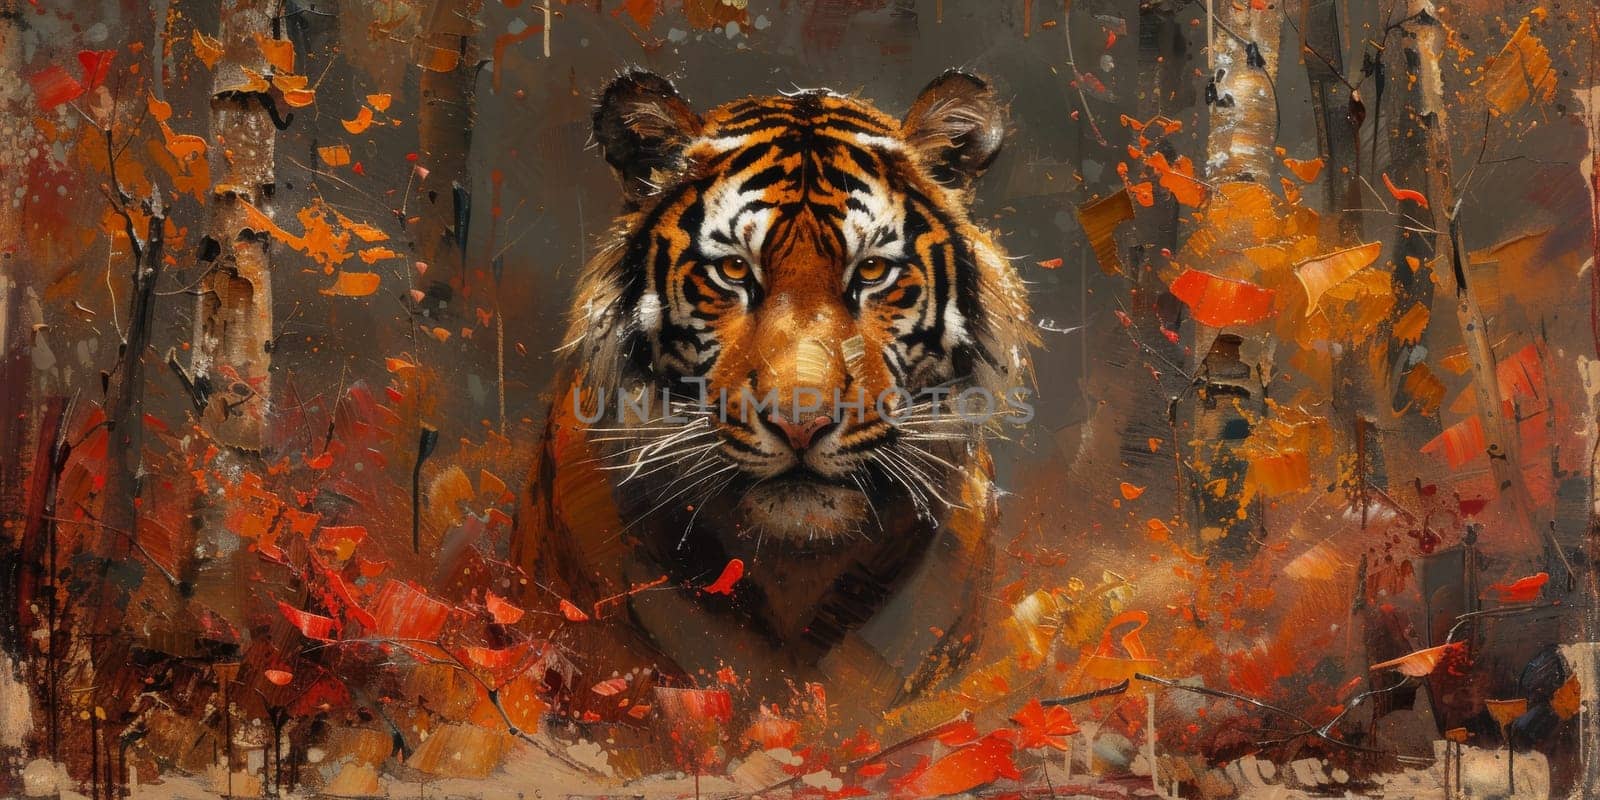 Painting of a tiger with oil technique. Wall art